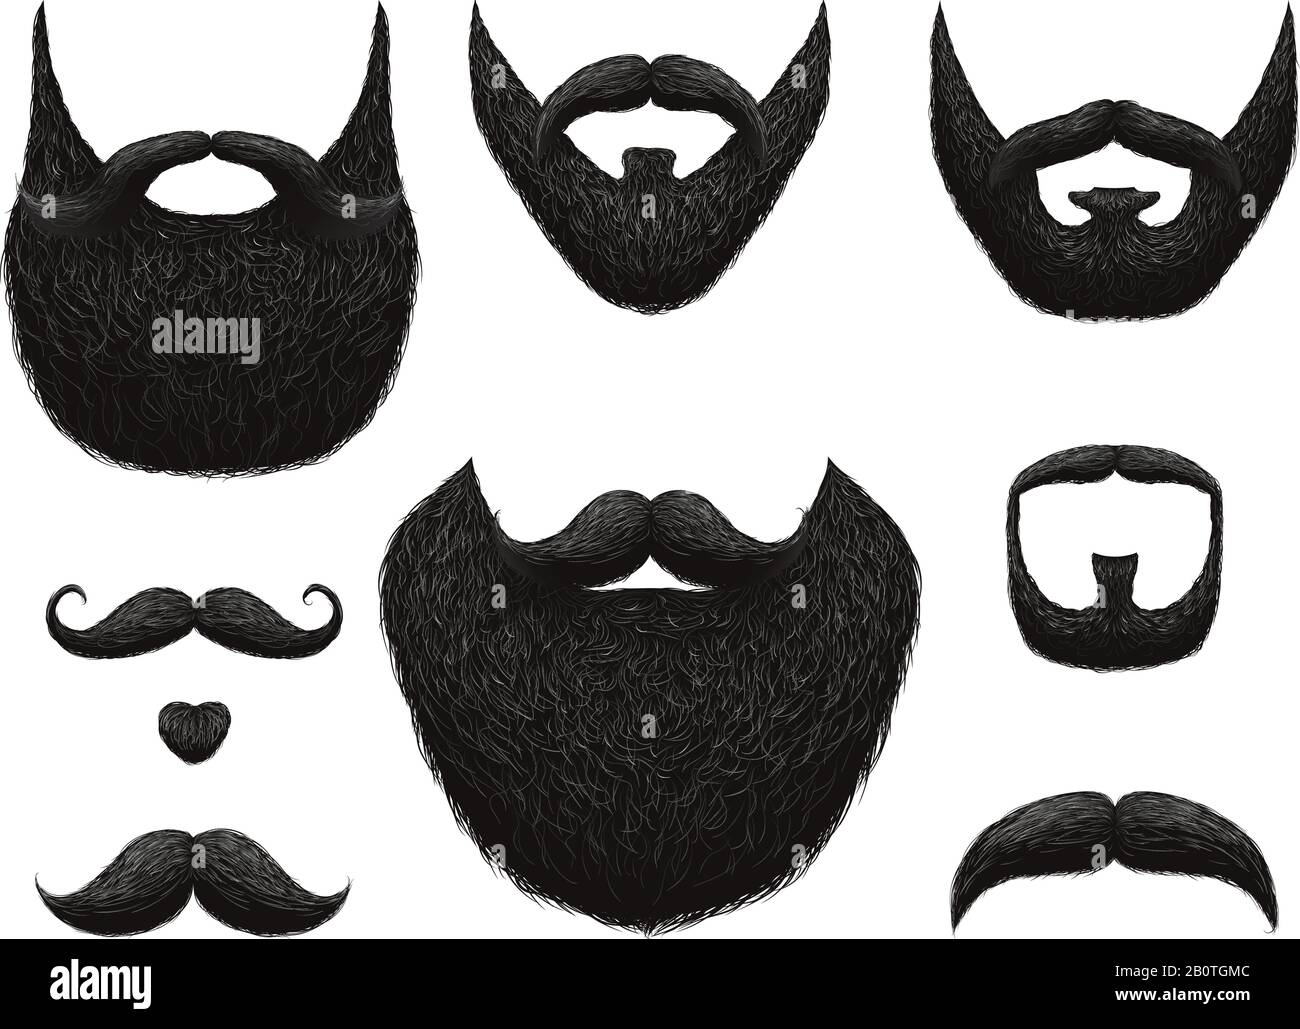 Hand drawn beards and mustaches vector collection. Illustration of black beard and mustache Stock Vector